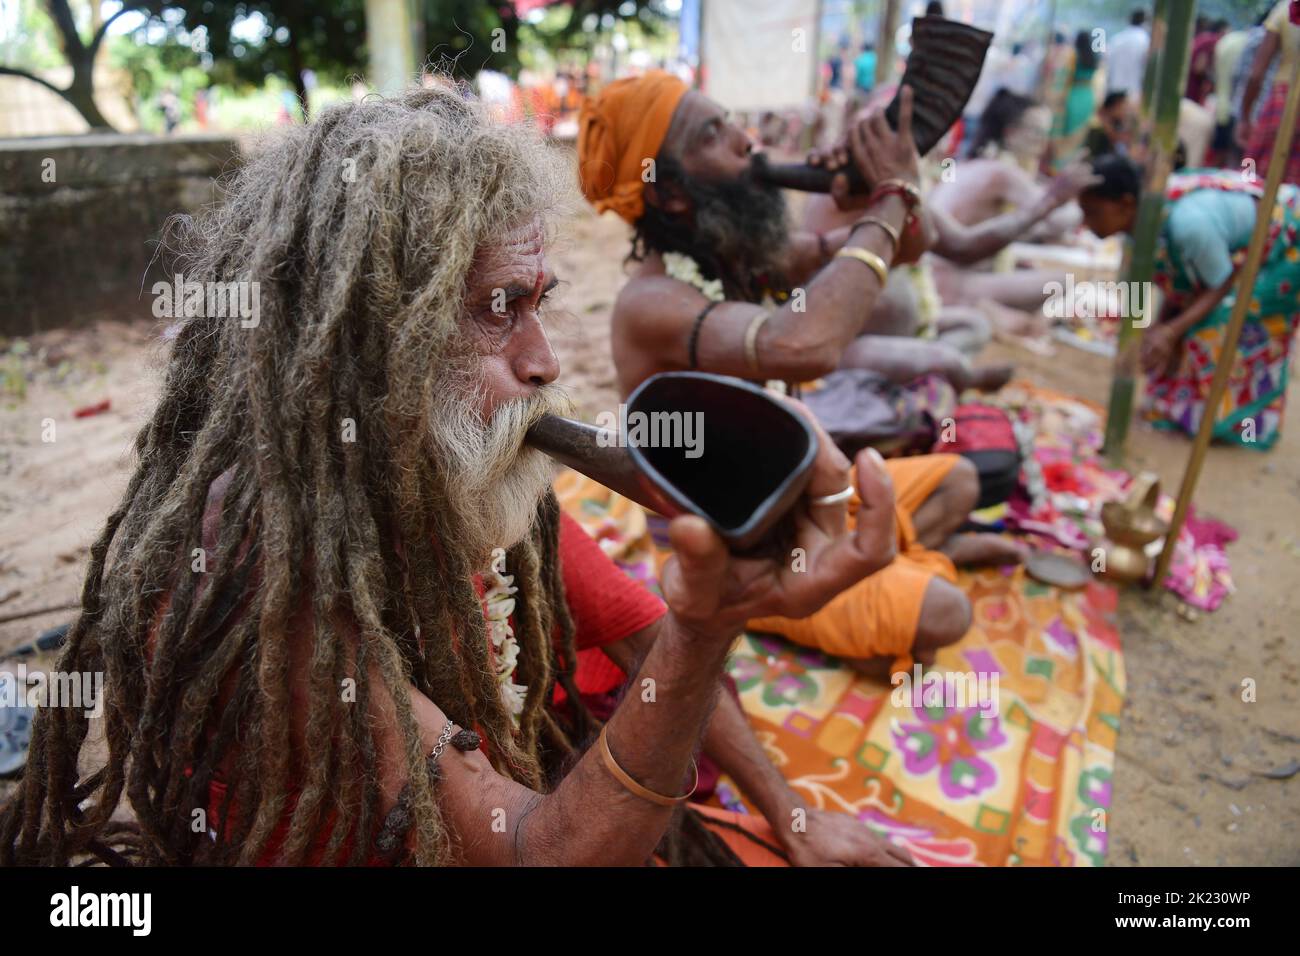 Naga Sadhus (Naked Yogis) perform different religious practices during 'Kumbh Mela' in Ranirbazar, Agartala. Kumbh Mela or Kumbha Mela is a major pilgrimage and festival in Hinduism. It is celebrated in a cycle of approximately 12 years, to celebrate every revolution Brihaspati completes. Tripura, India. Stock Photo